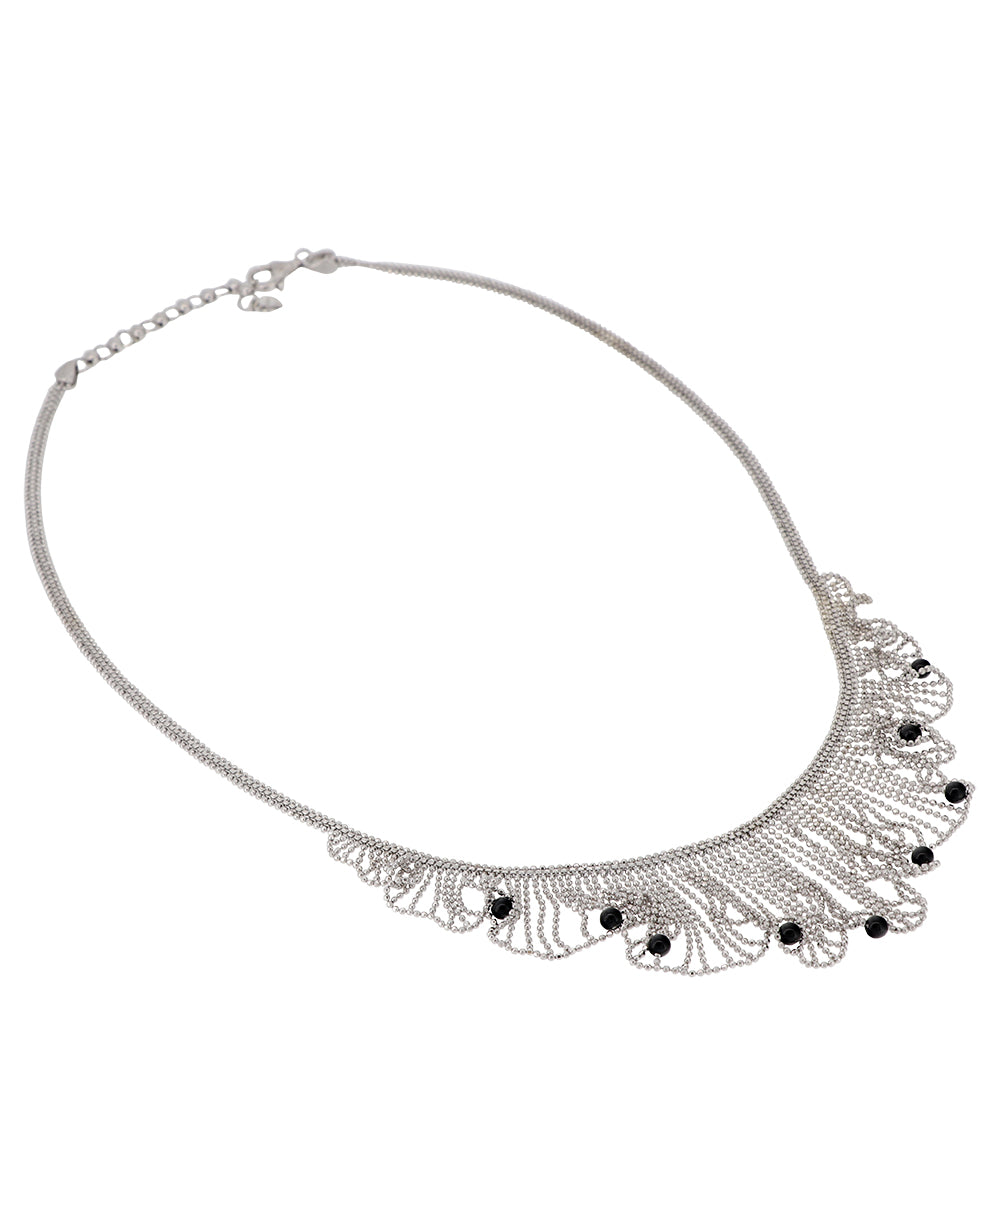 Luxurious silver fringe necklace adorned with black spinel beads, handcrafted in Laos 